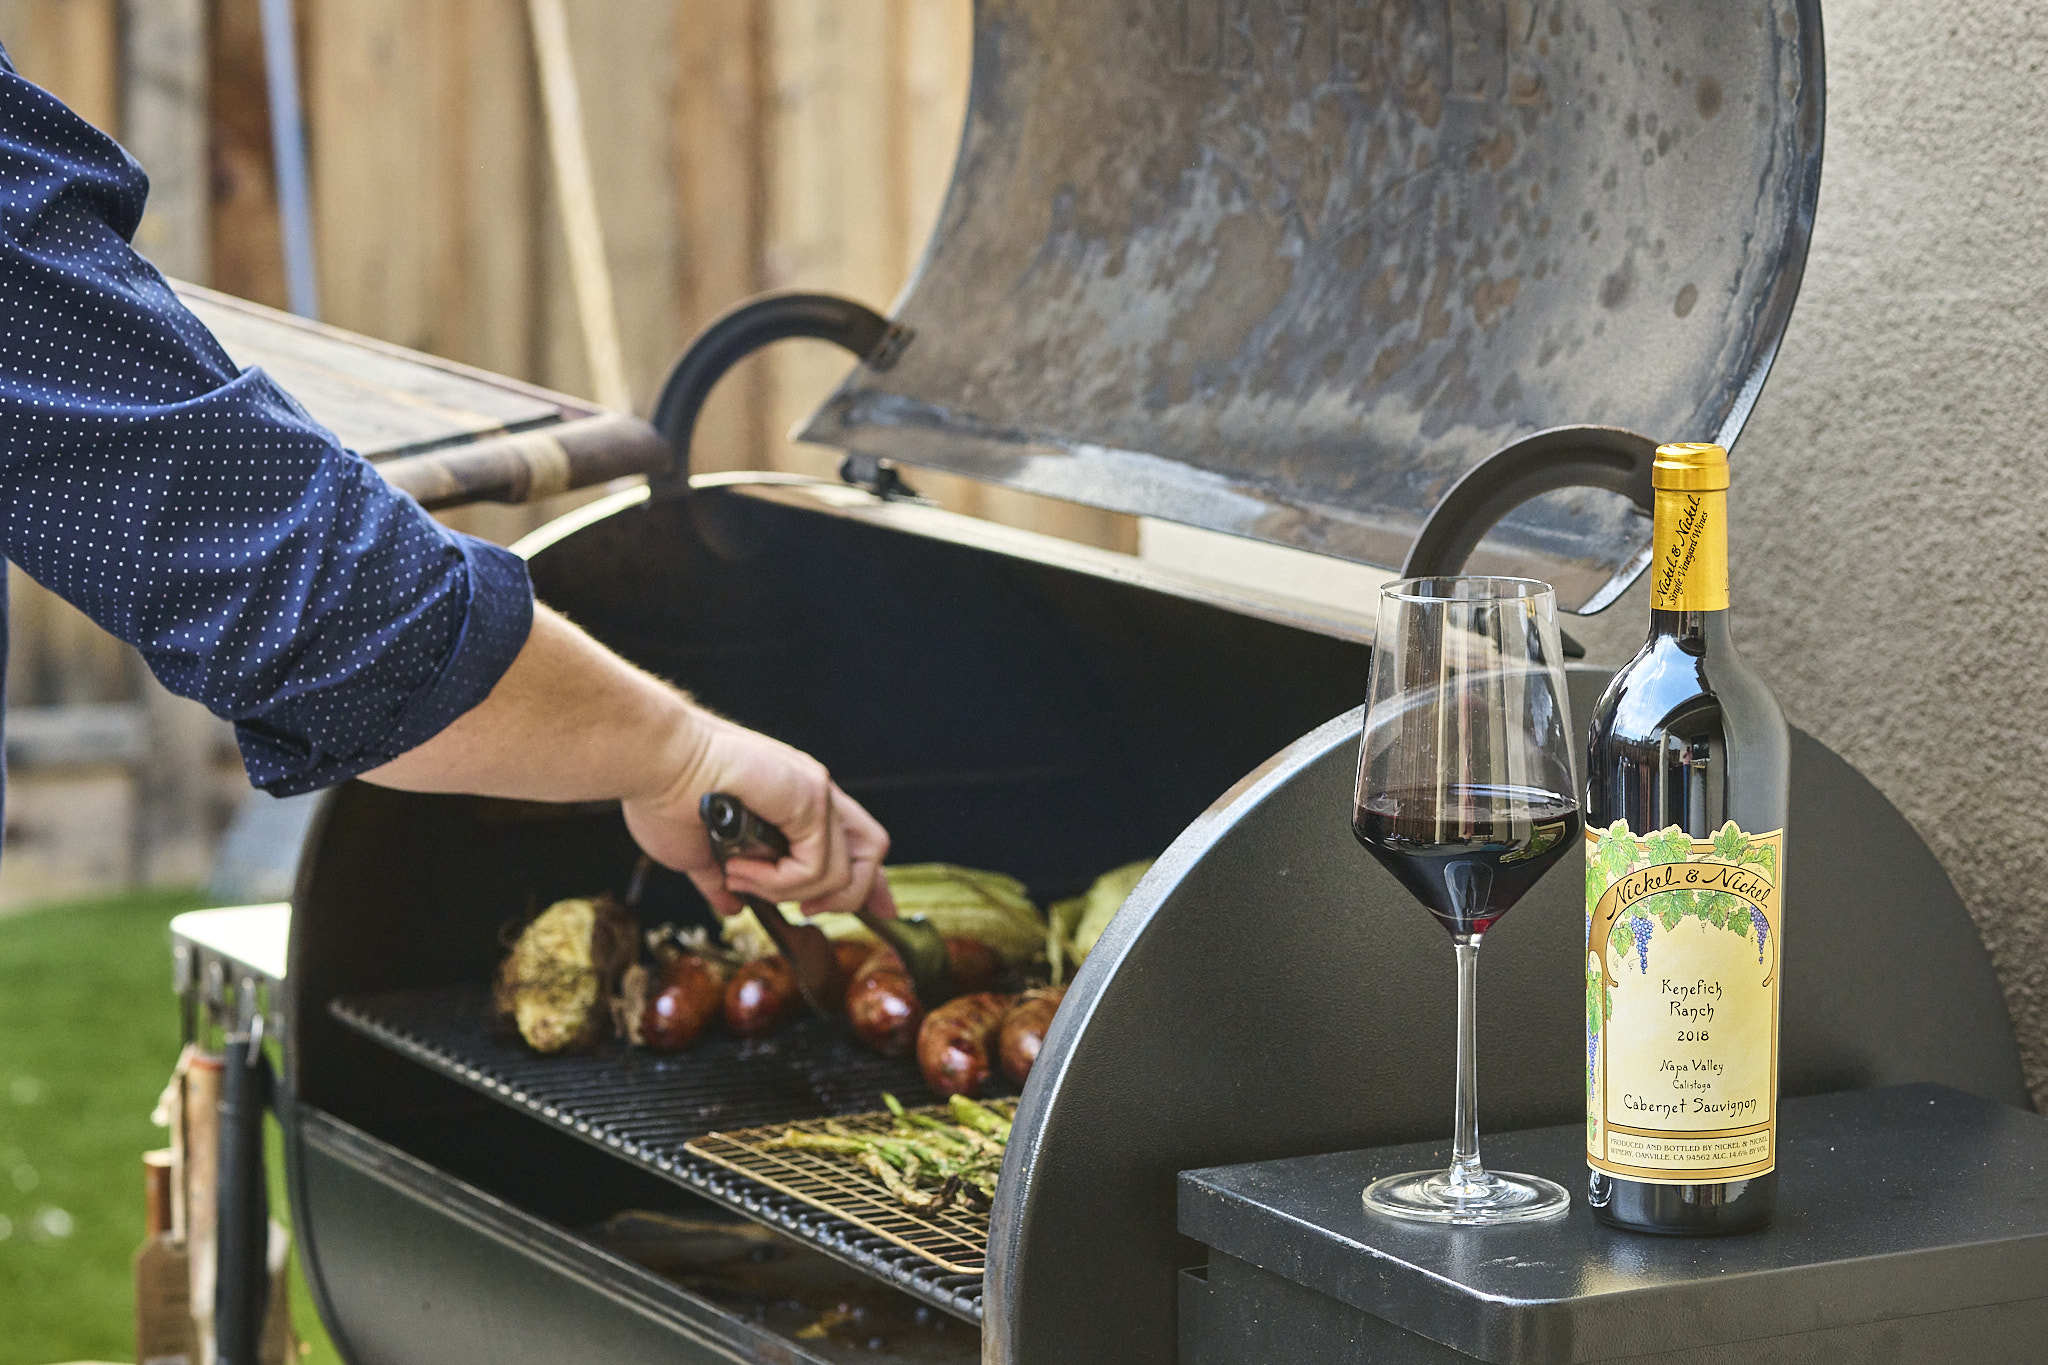 Grilling and Grapes: Our Team's Favorite Wine & Barbecue Pairings